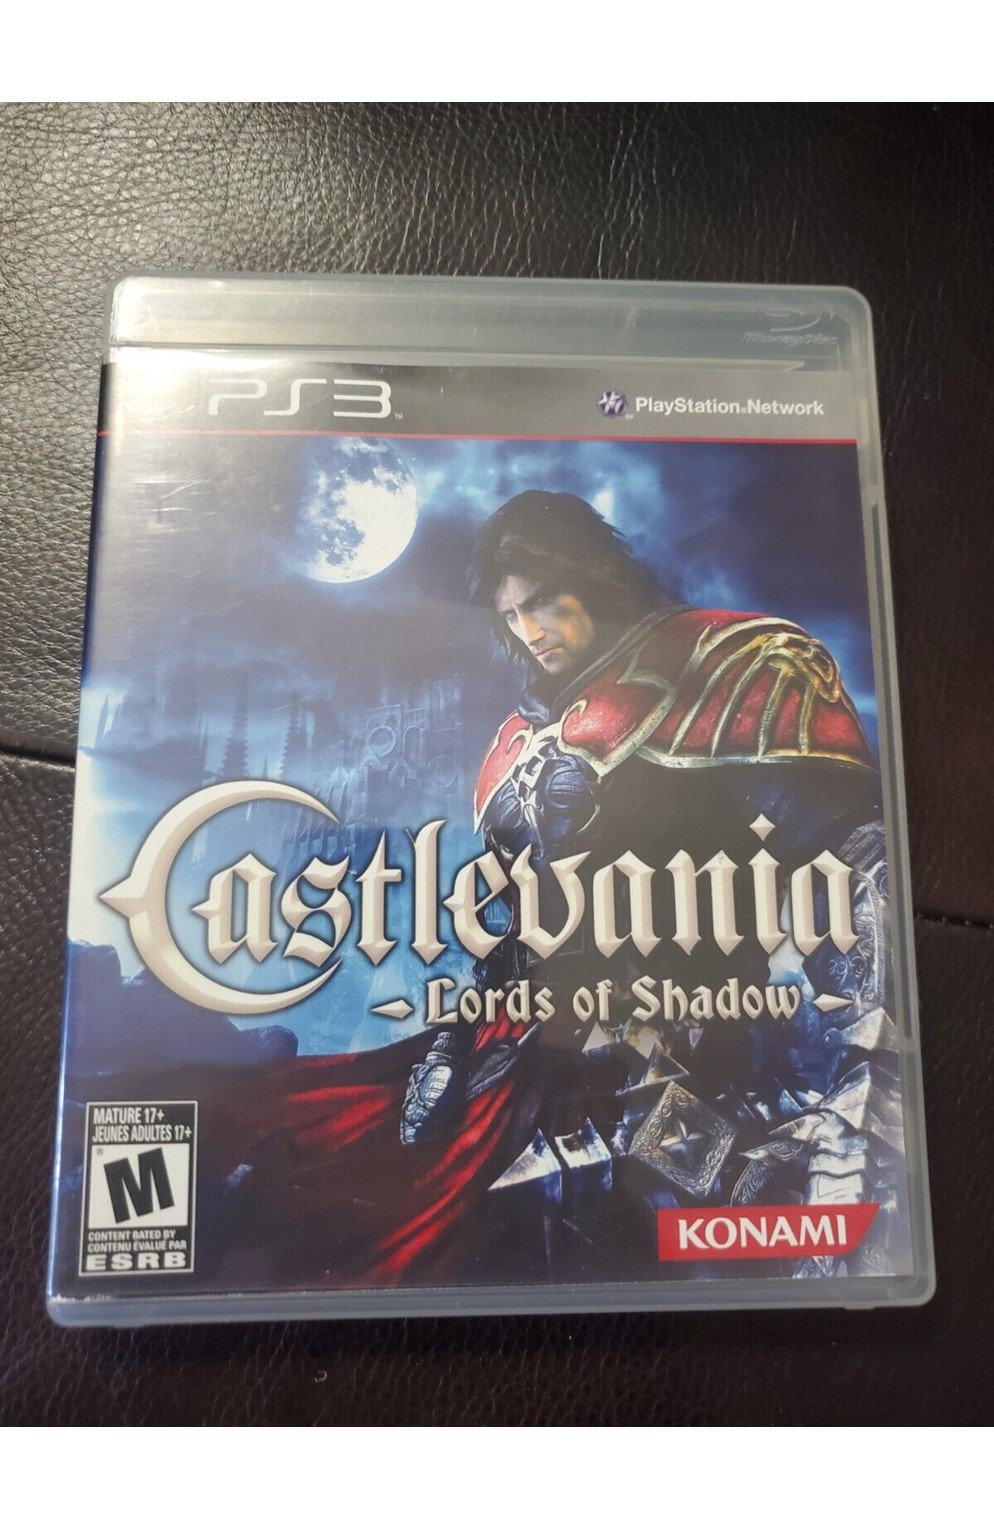 Castlevania: Lords of Shadow 2, Software